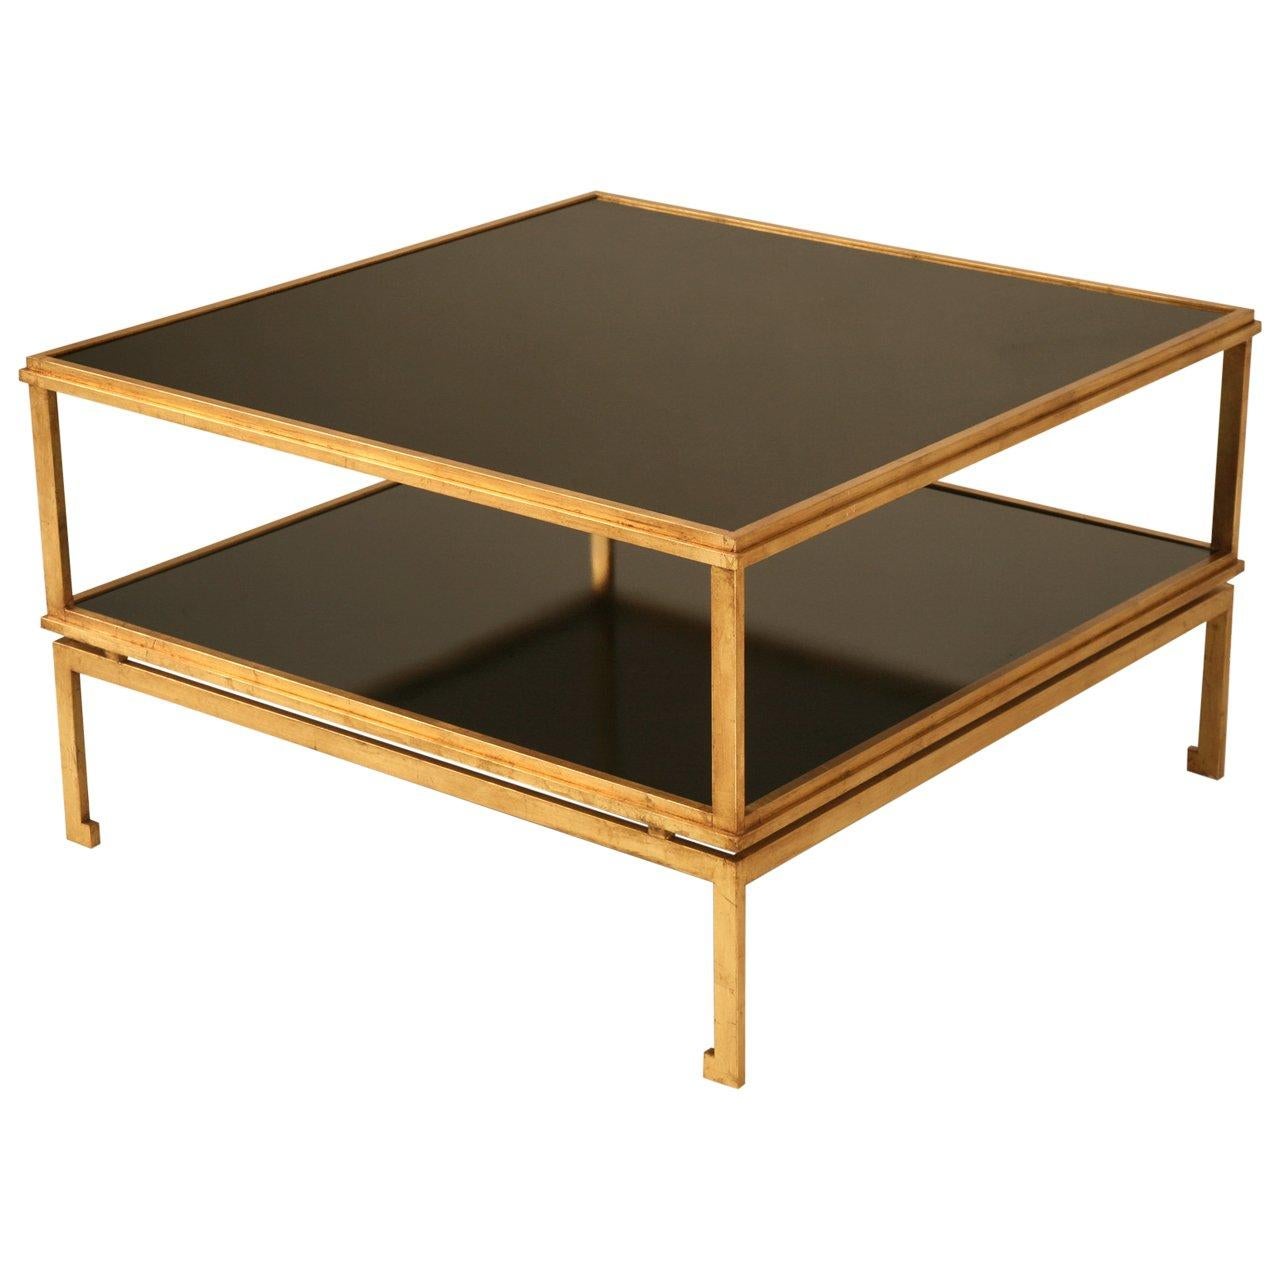 French Inspired Mid-Century Modern Gilded Coffee Table Available in Any Size For Sale